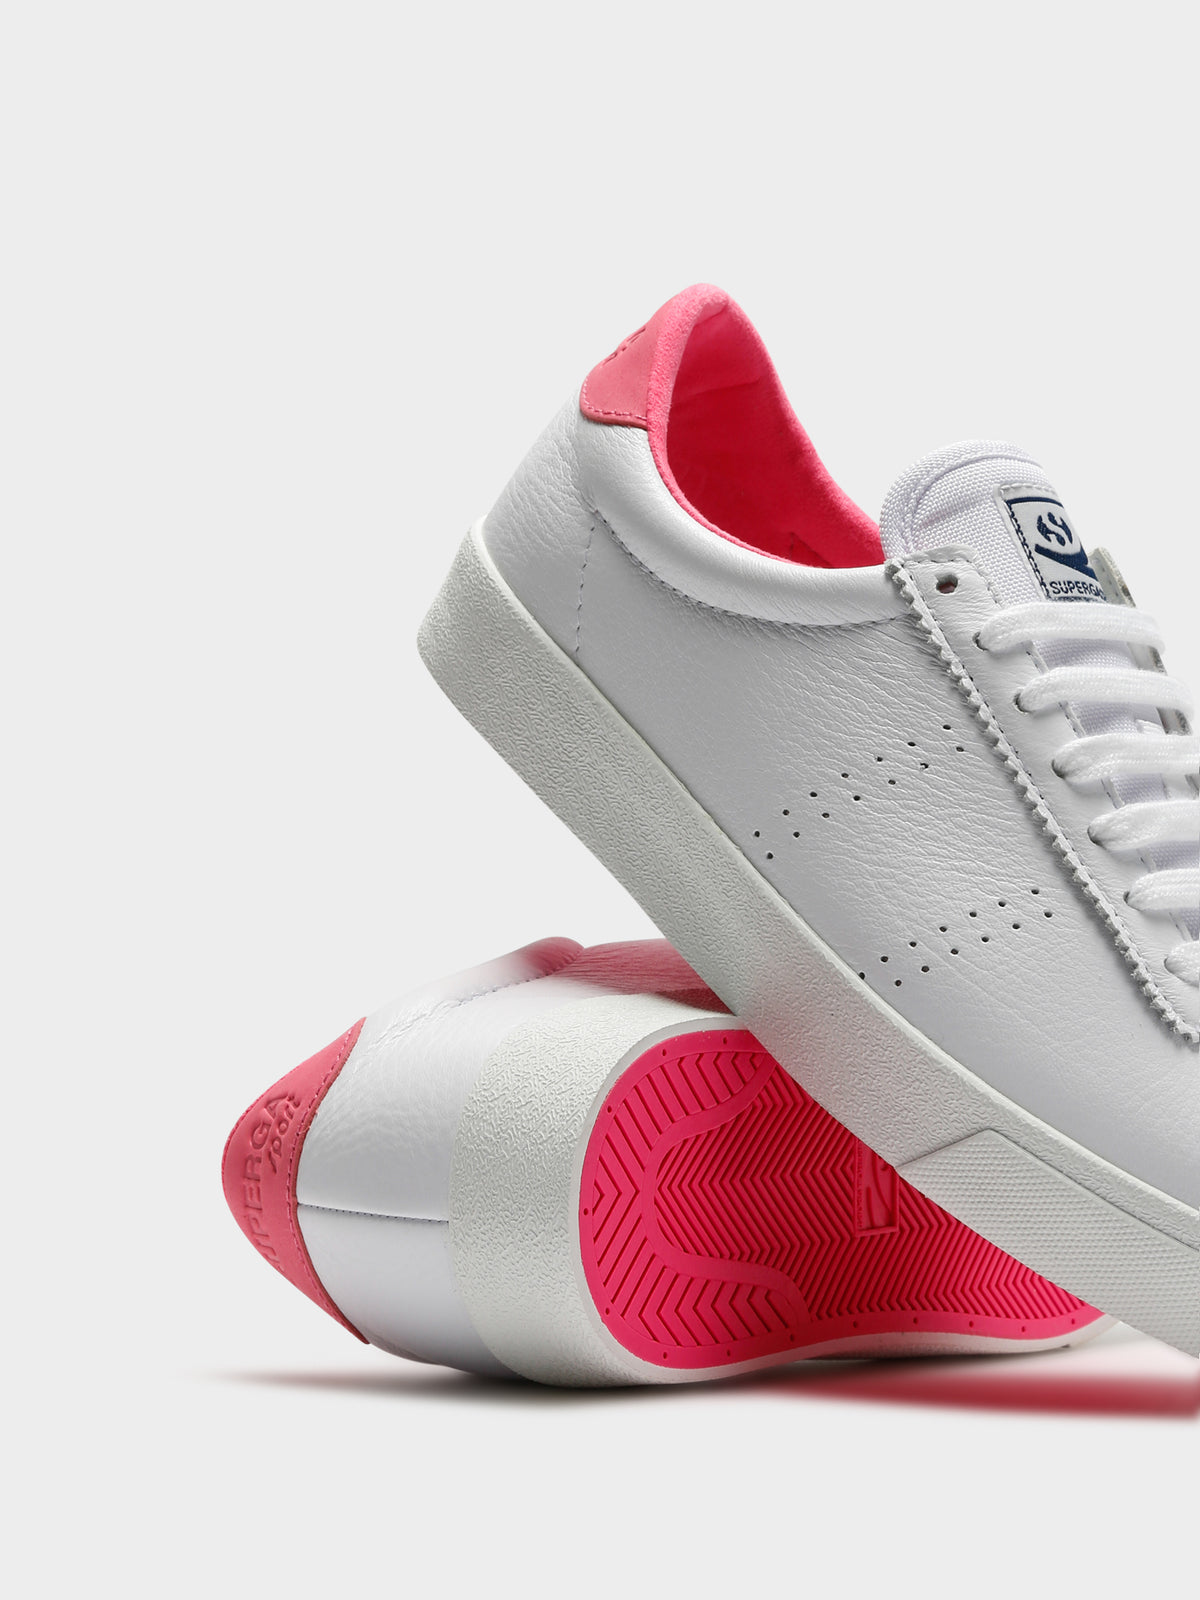 Womens 2843 Clubs Comfleau Sneakers in White &amp; Fuchsia Pink